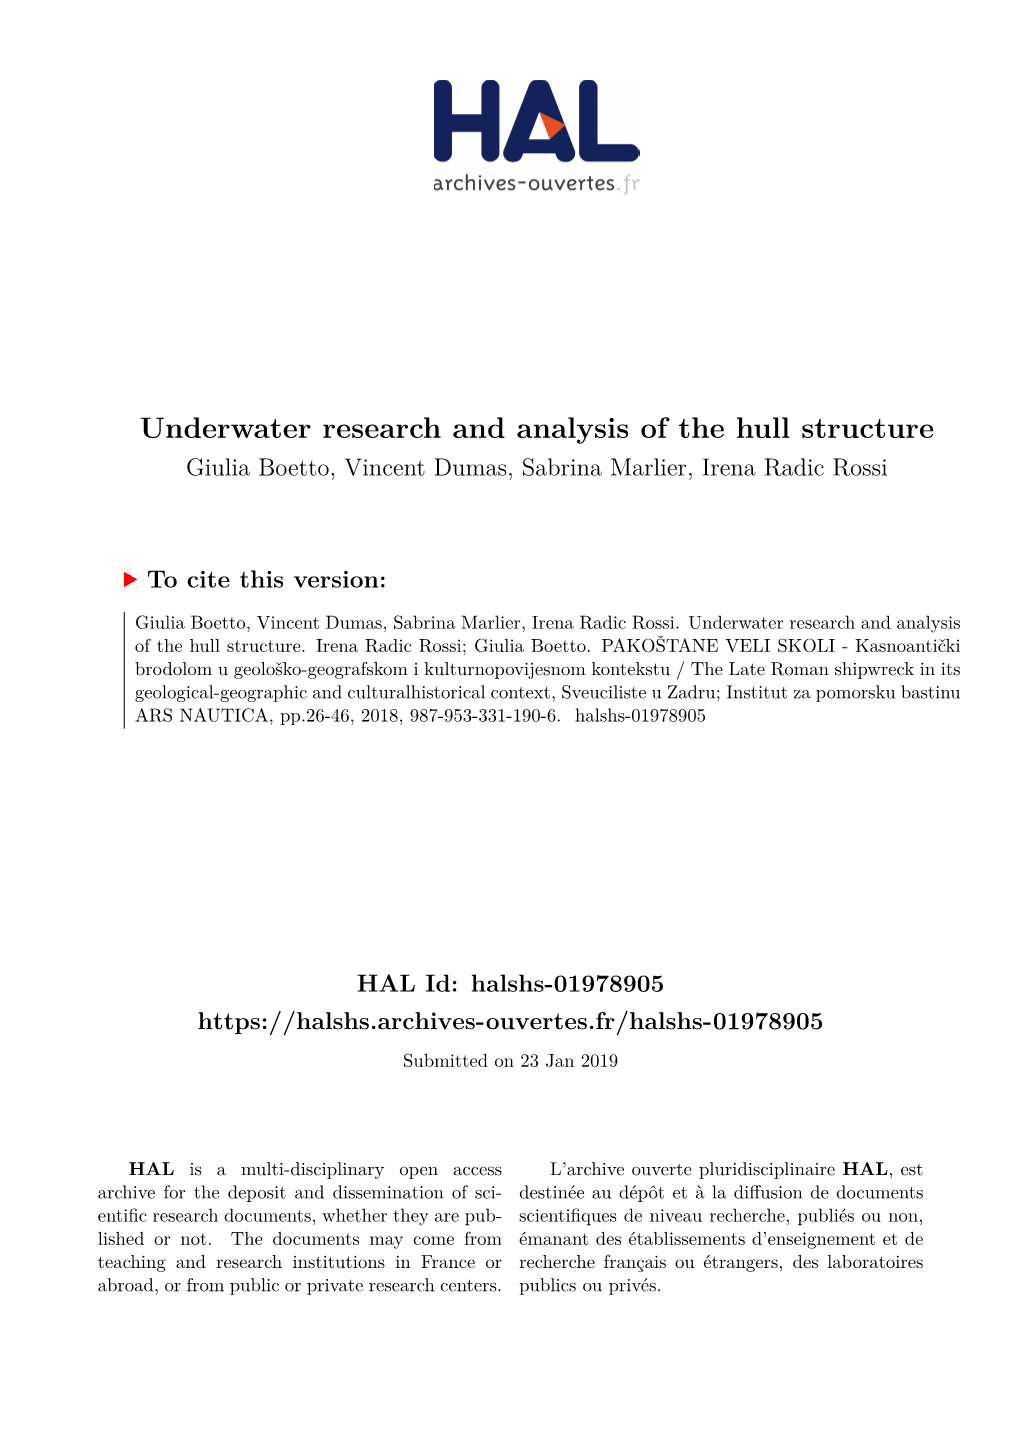 Underwater Research and Analysis of the Hull Structure Giulia Boetto, Vincent Dumas, Sabrina Marlier, Irena Radic Rossi